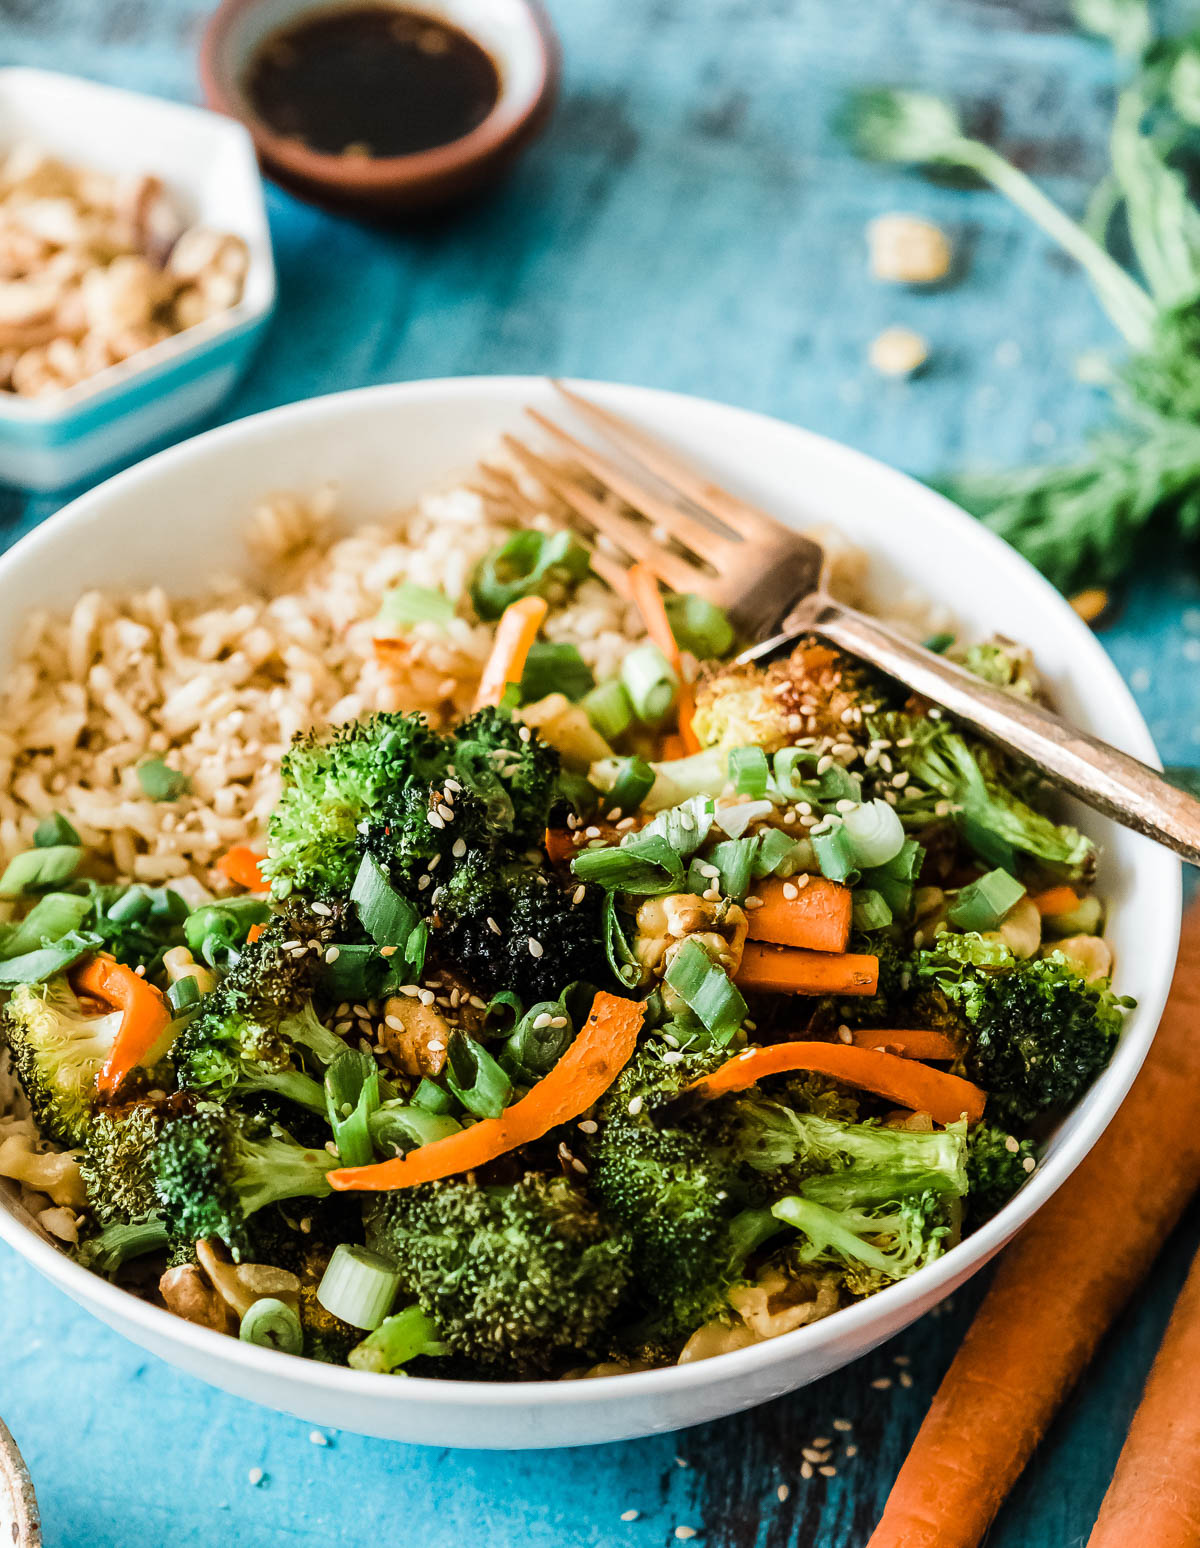 Nourishing Winter Dinner of Rice Bowl with Broccoli